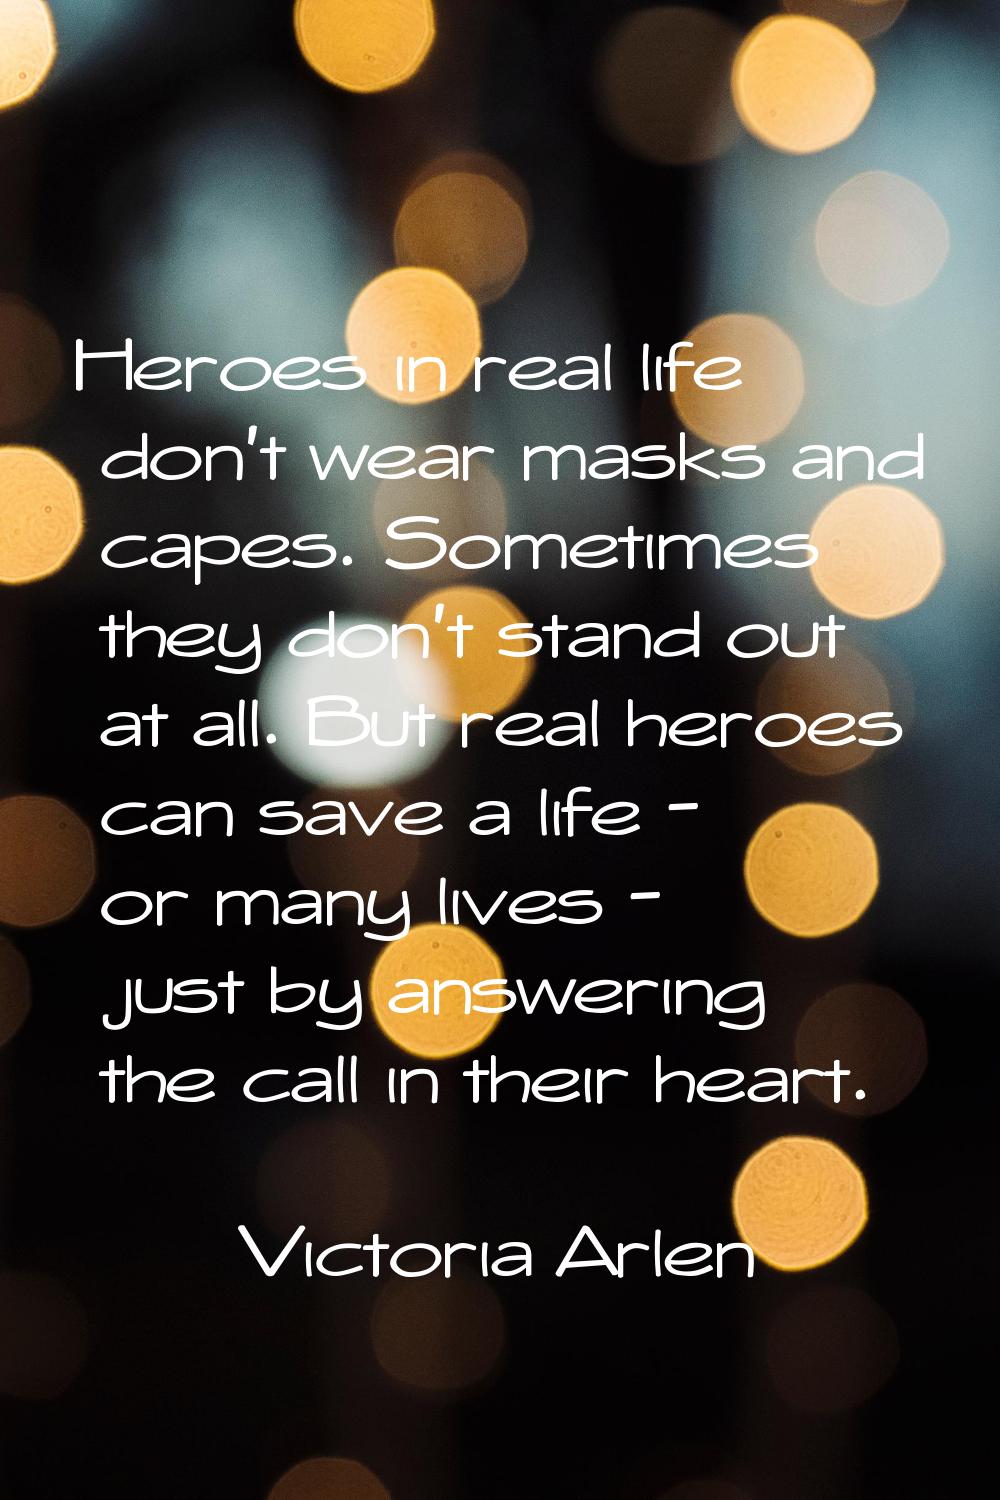 Heroes in real life don't wear masks and capes. Sometimes they don't stand out at all. But real her